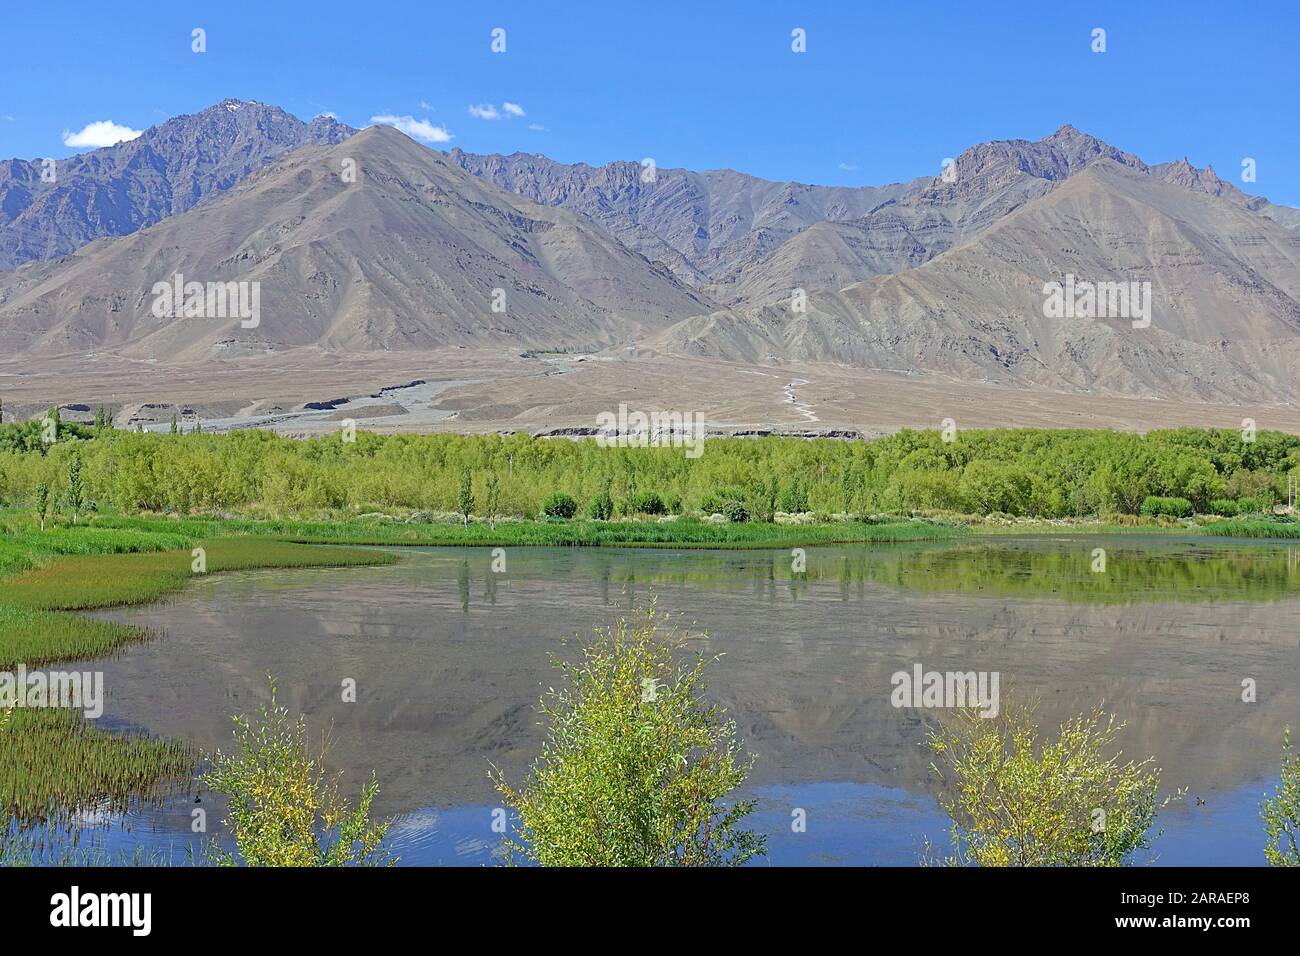 Lakes of Indus river with bare mountains behind next to Leh the joint capital and largest town of Ladakh - India 2019 Stock Photo